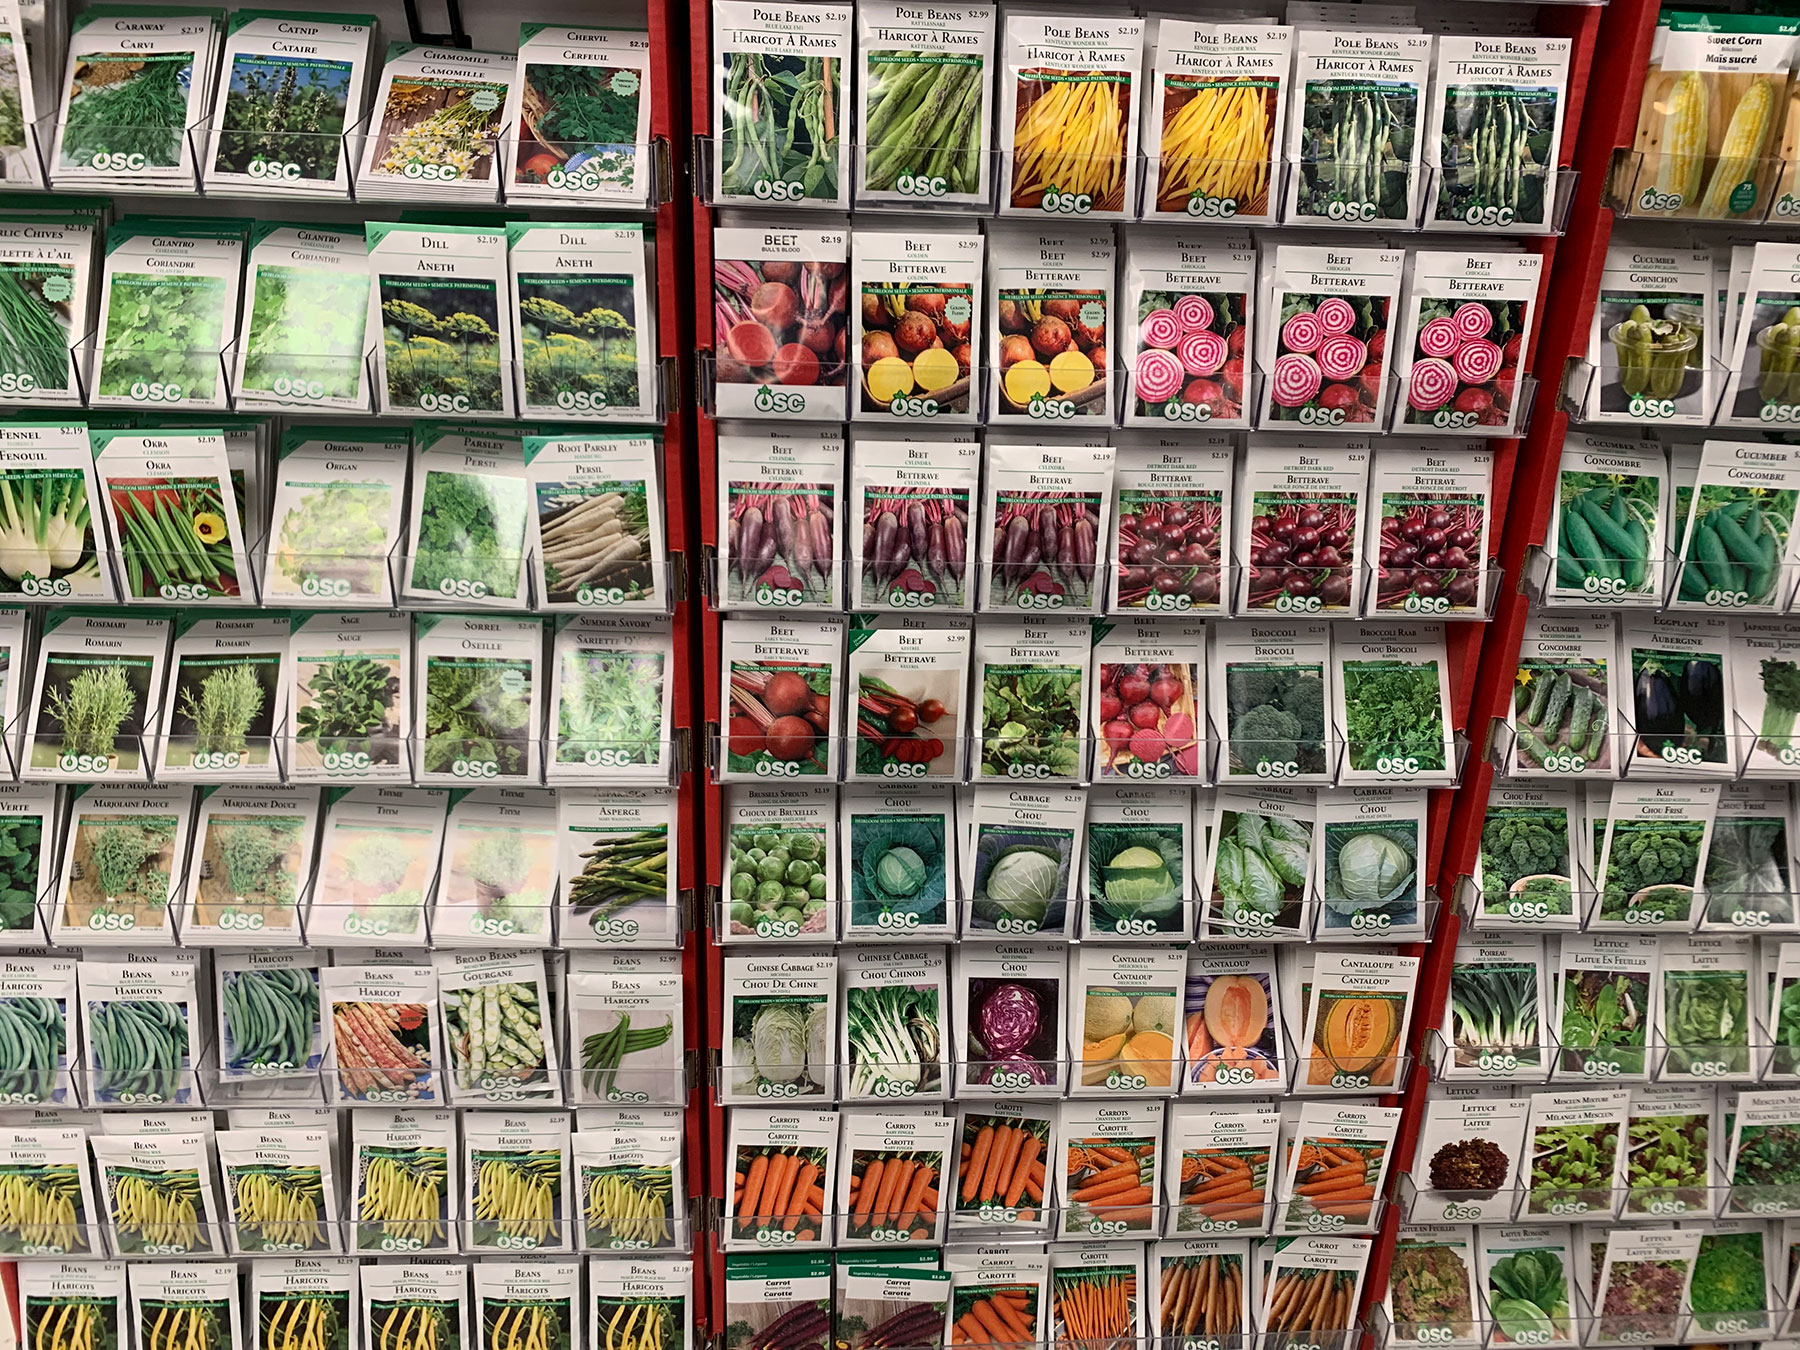 Sprout into Spring: Our Gardening Seeds Have Arrived!